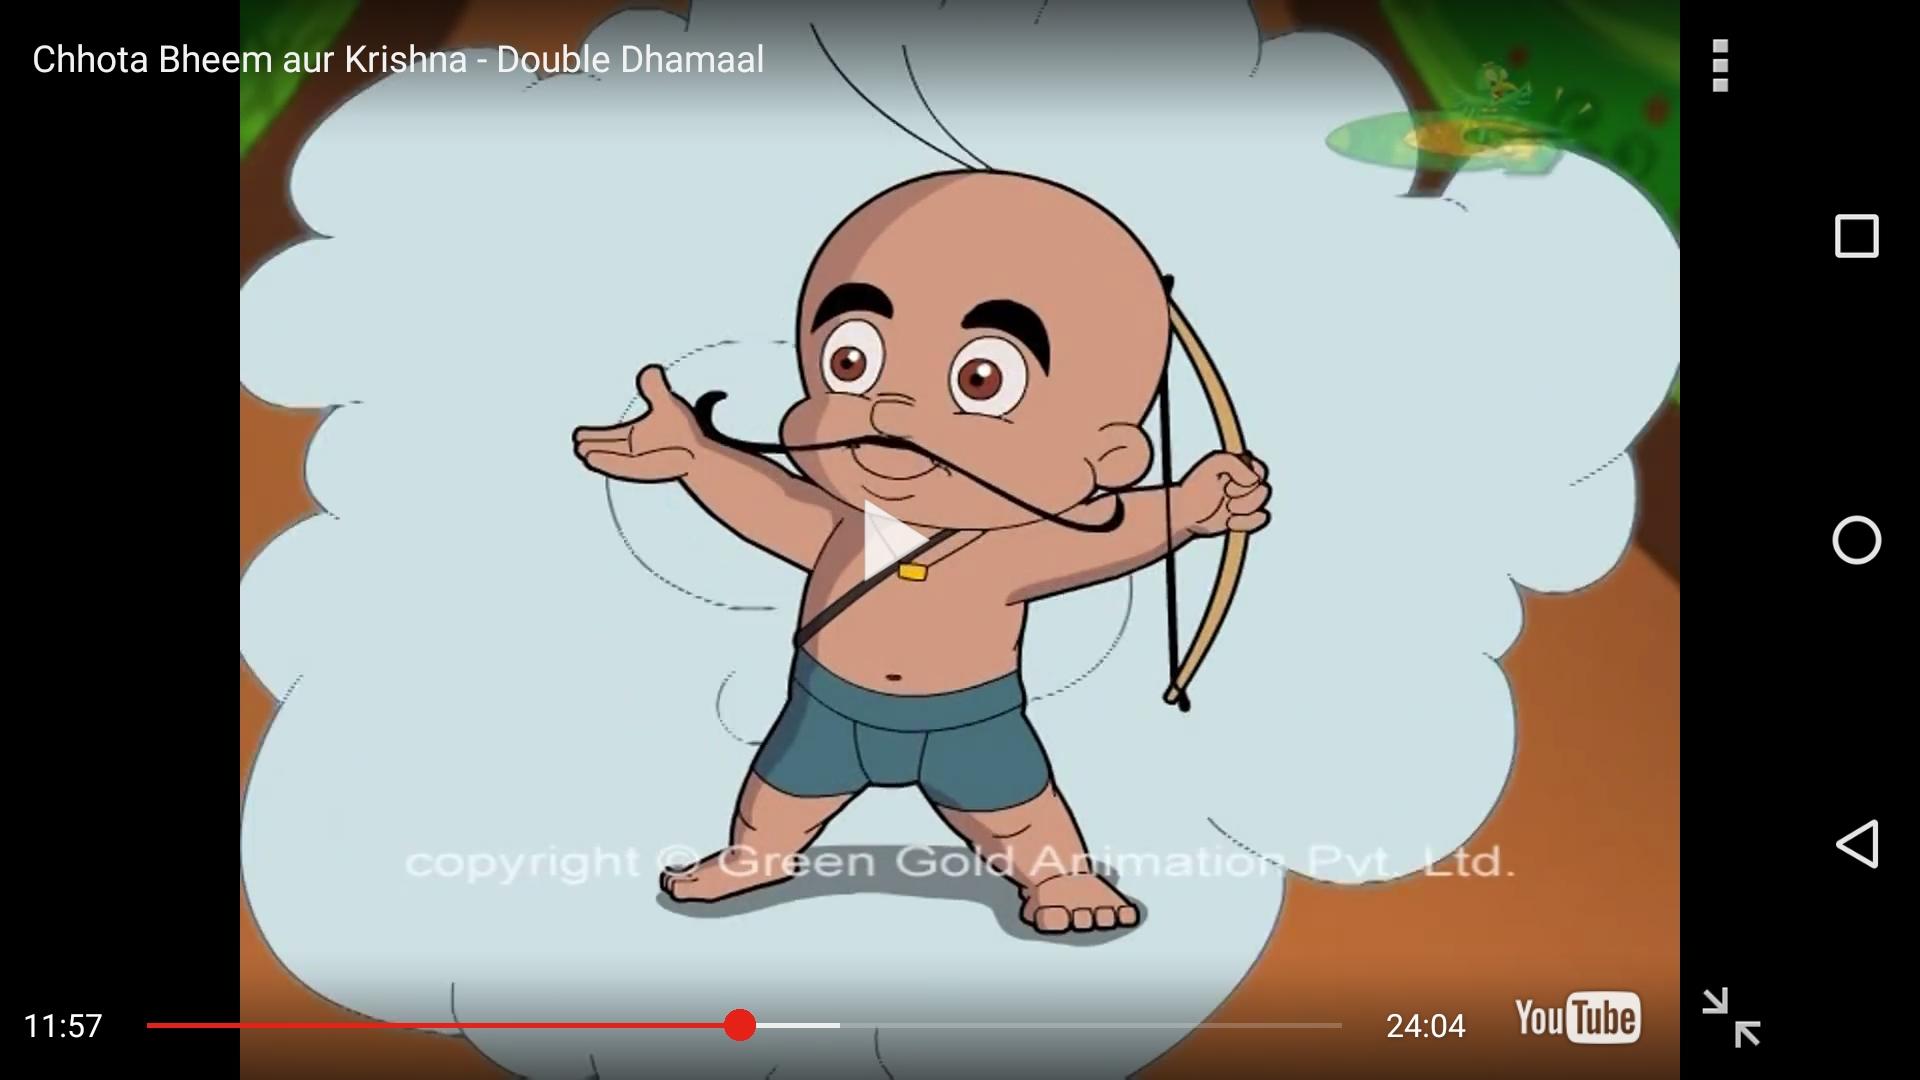 Chhota Bheem Video APK  for Android – Download Chhota Bheem Video APK  Latest Version from 